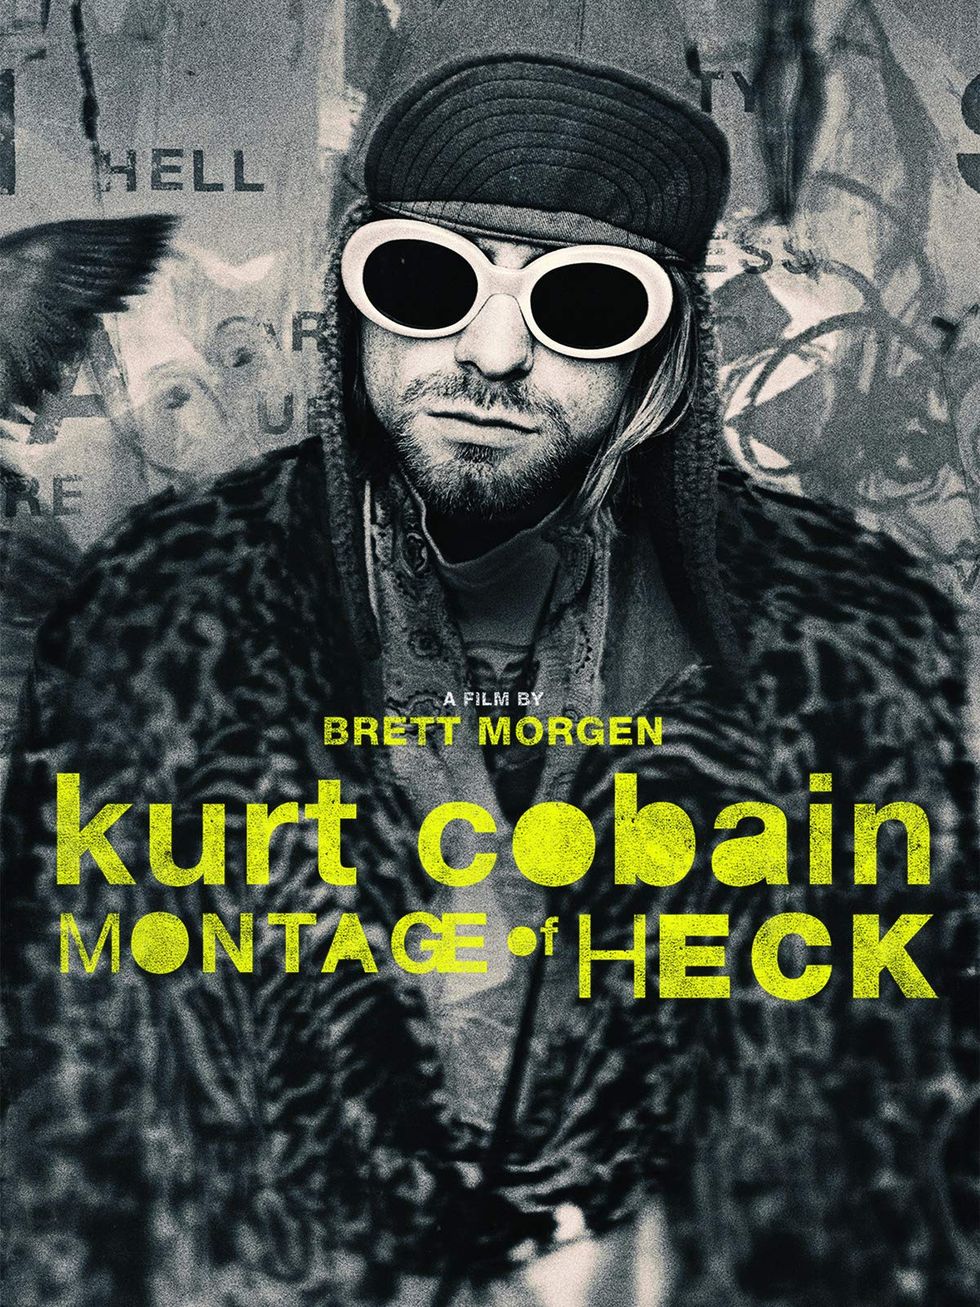 "Montage Of Heck"